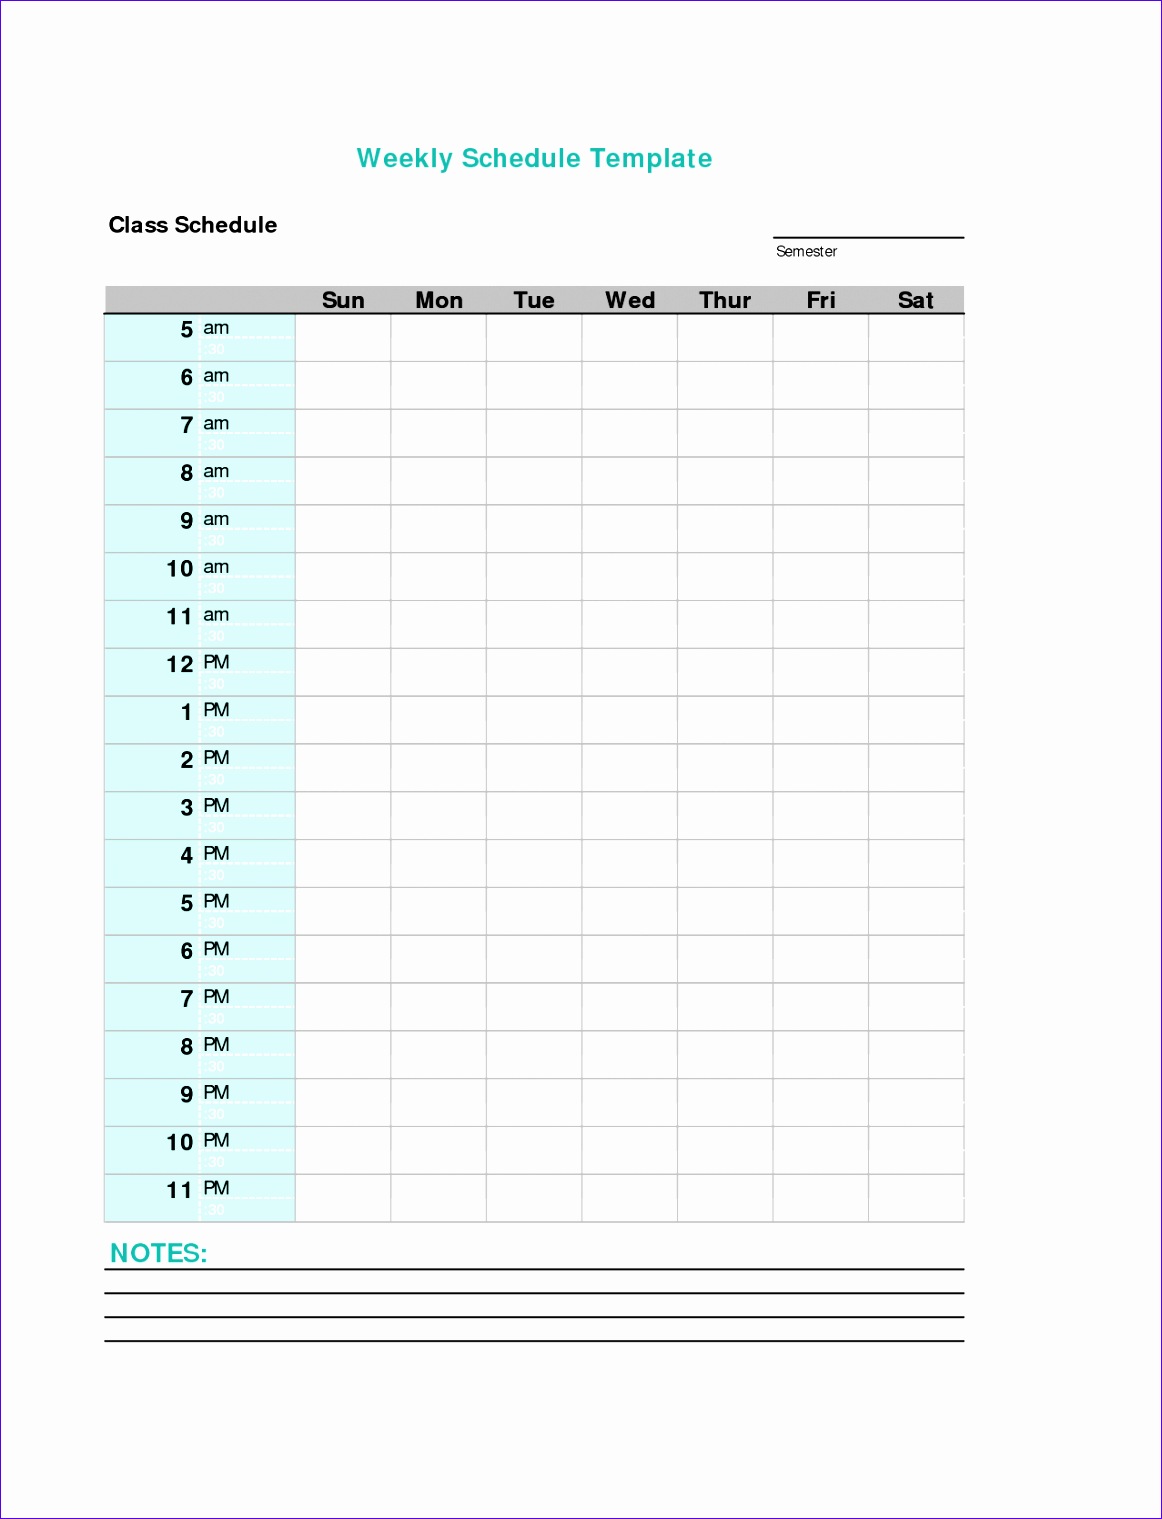 3 weekly schedule template pdf 11621519